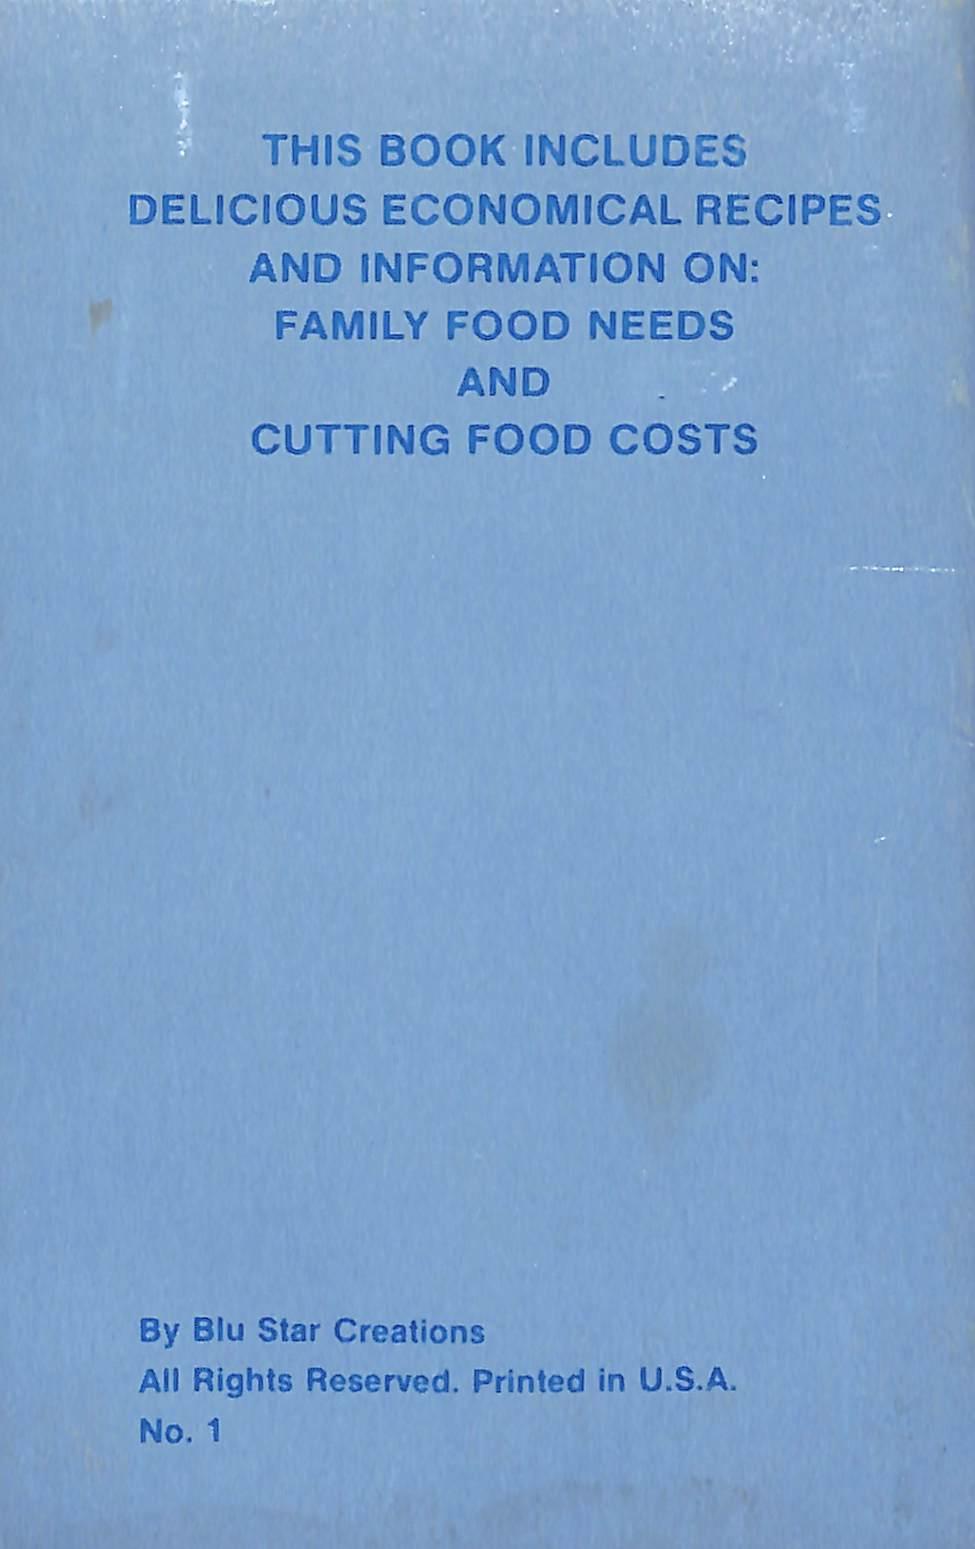 . THIS BOOK INCLUDES DELICIOUS ECONOMICAL RECIPES AND INFORMATION ON: FAMILY FOOD NEEDS